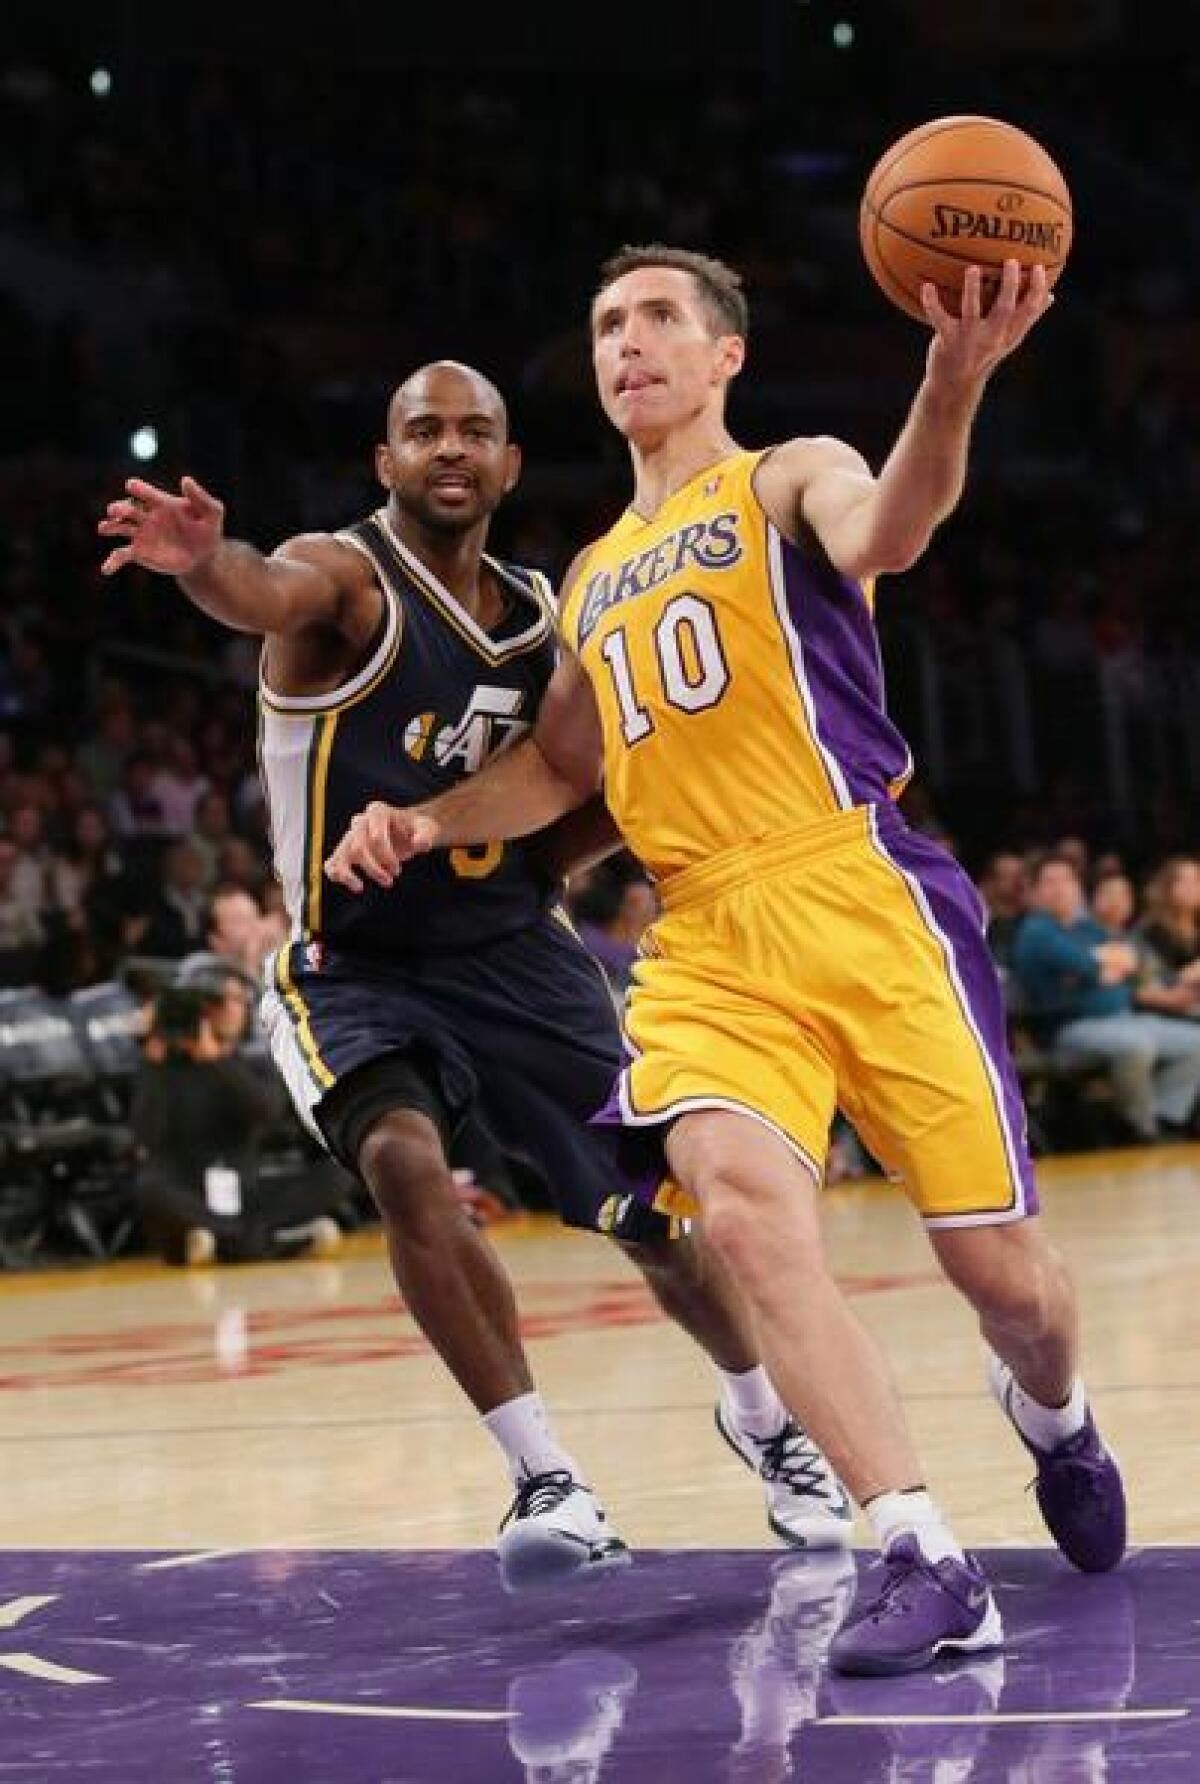 Lakers point guard Steve Nash did not play in the second half of the team's 113-90 loss to the Minnesota Timberwolves on Sunday because of persistent pain in his back.